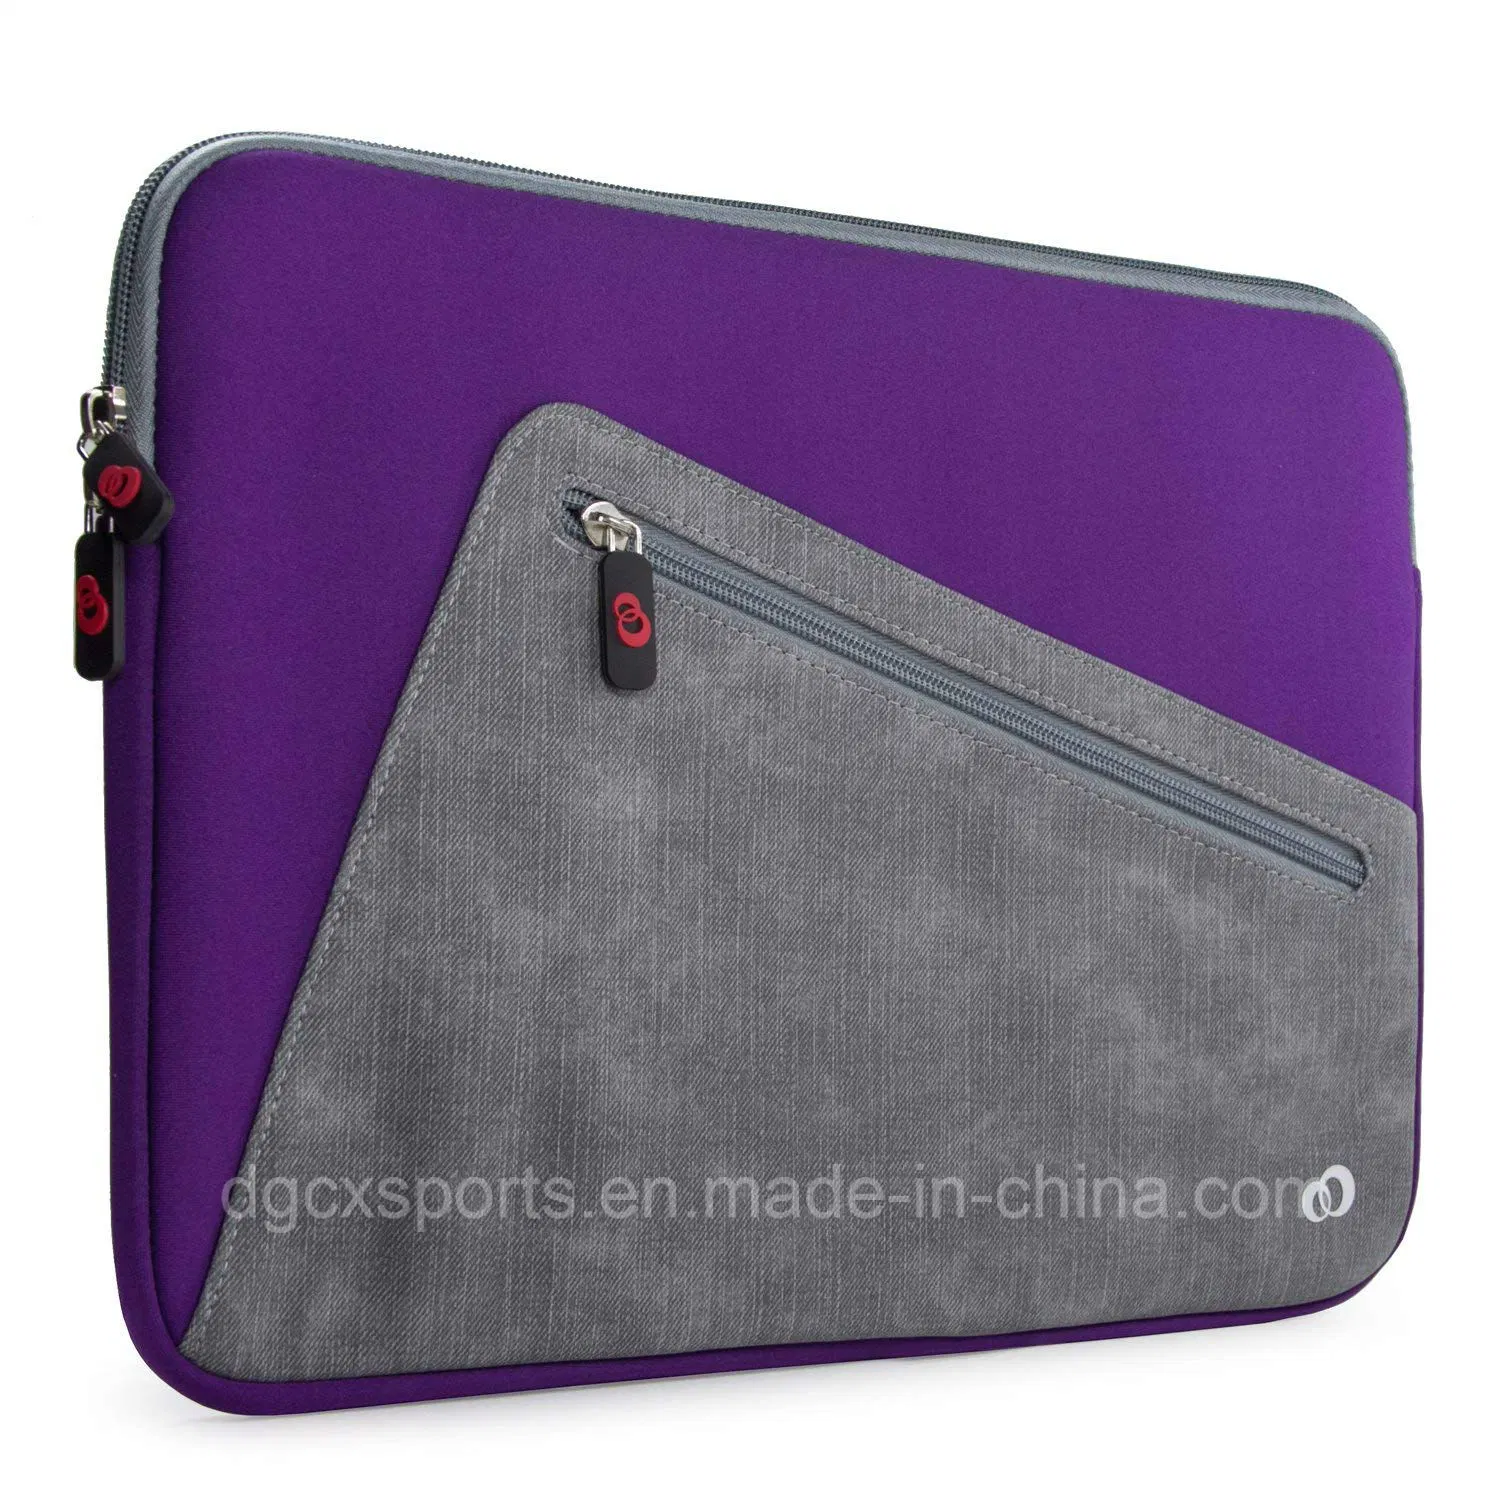 360 Water Resistant PC Cover Case for MacBook PRO